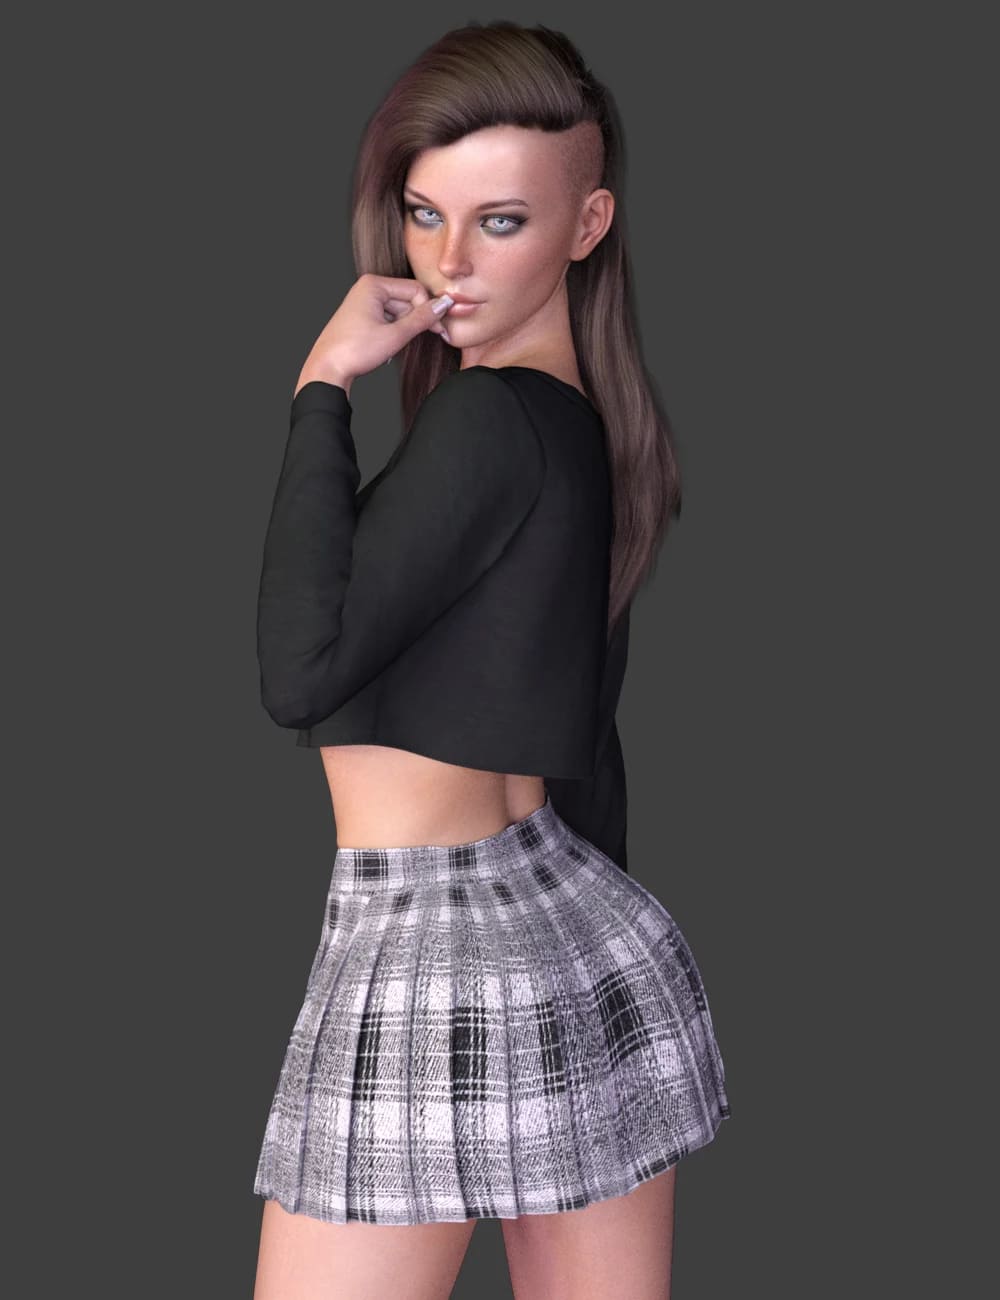 X-Fashion Girl Collection for Genesis 8 Females_DAZ3D下载站